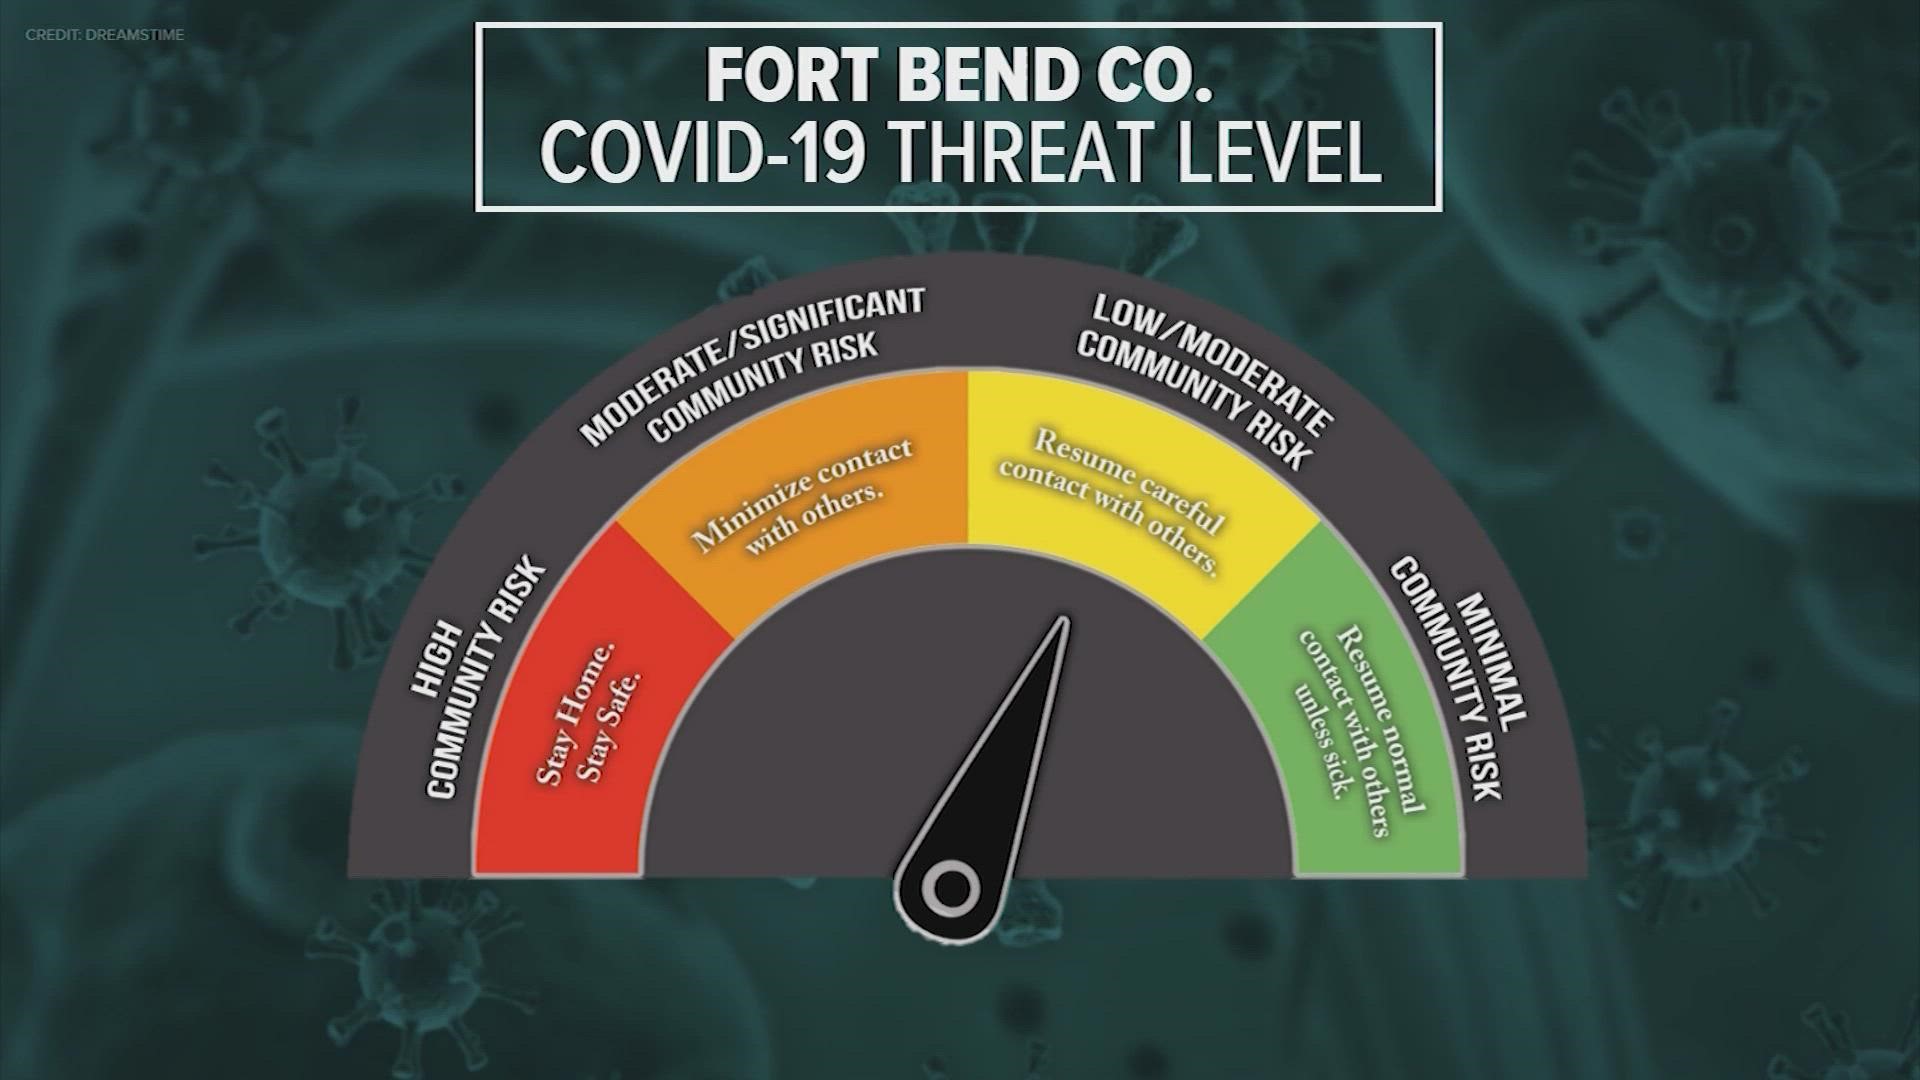 Fort Bend County lowered its COVID-19 threat level Friday based on fewer positive cases and a decrease in hospitalizations and ICU admissions.